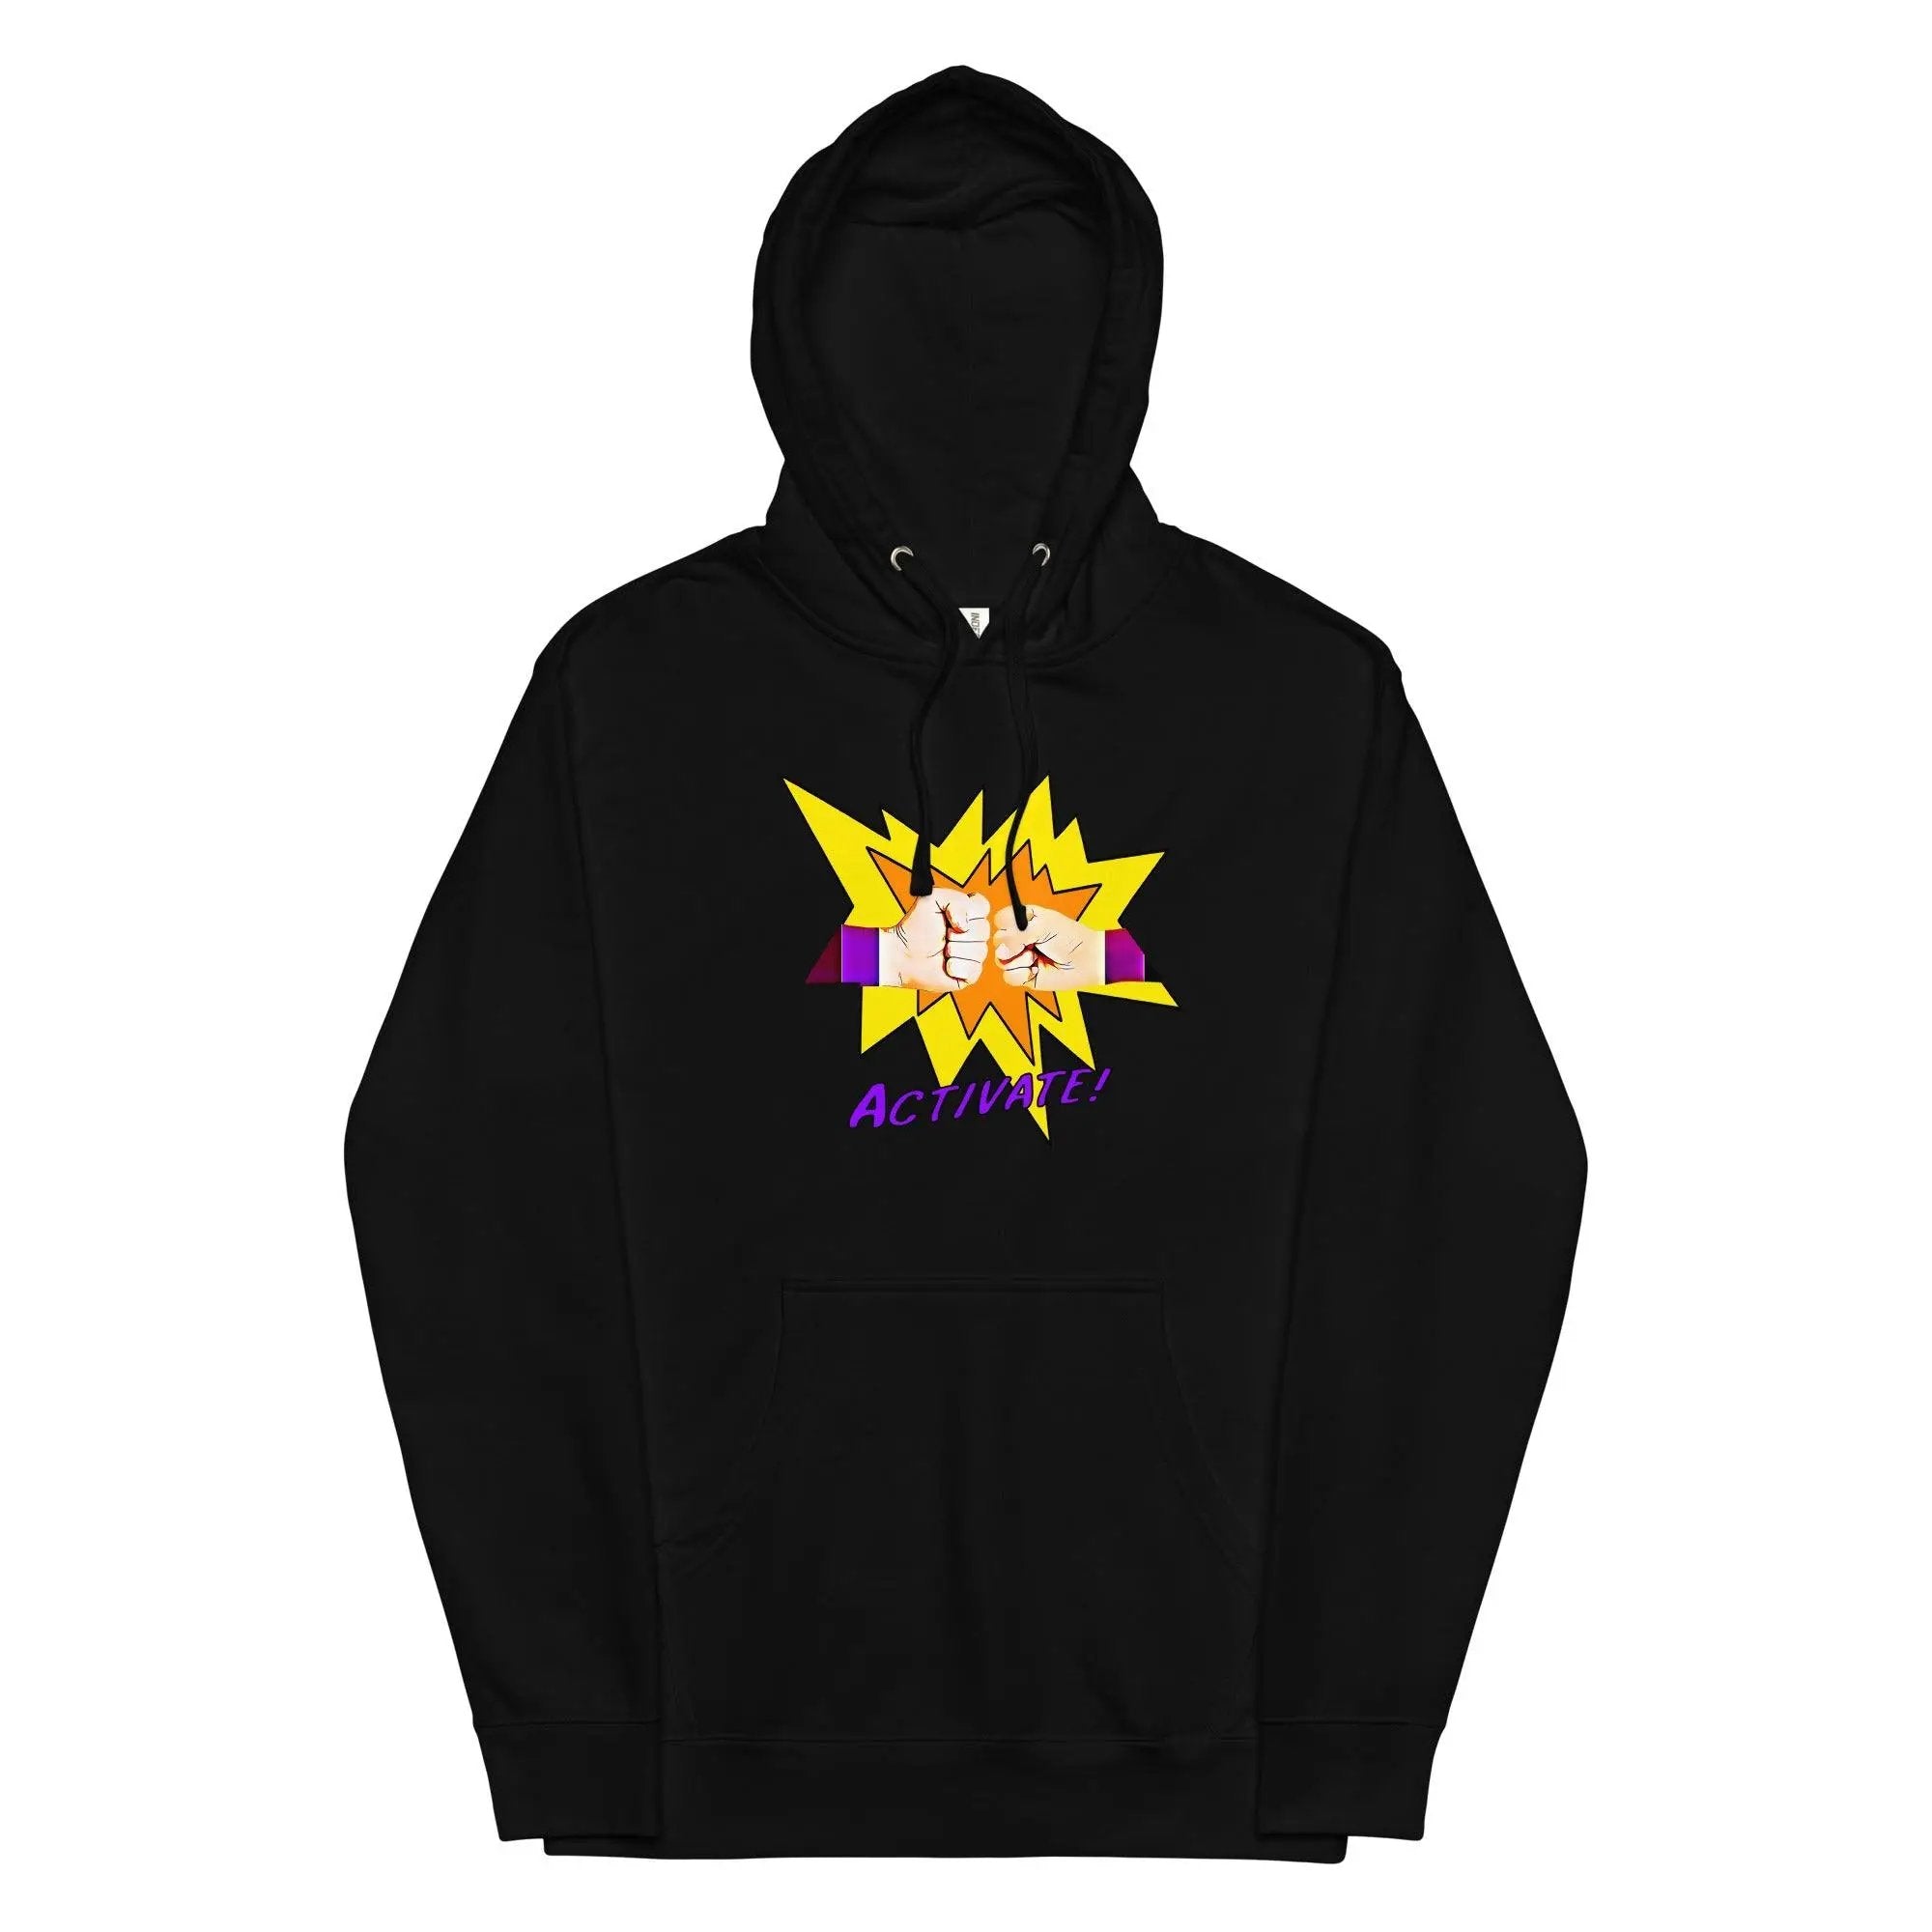 Activate! Unisex midweight hoodie